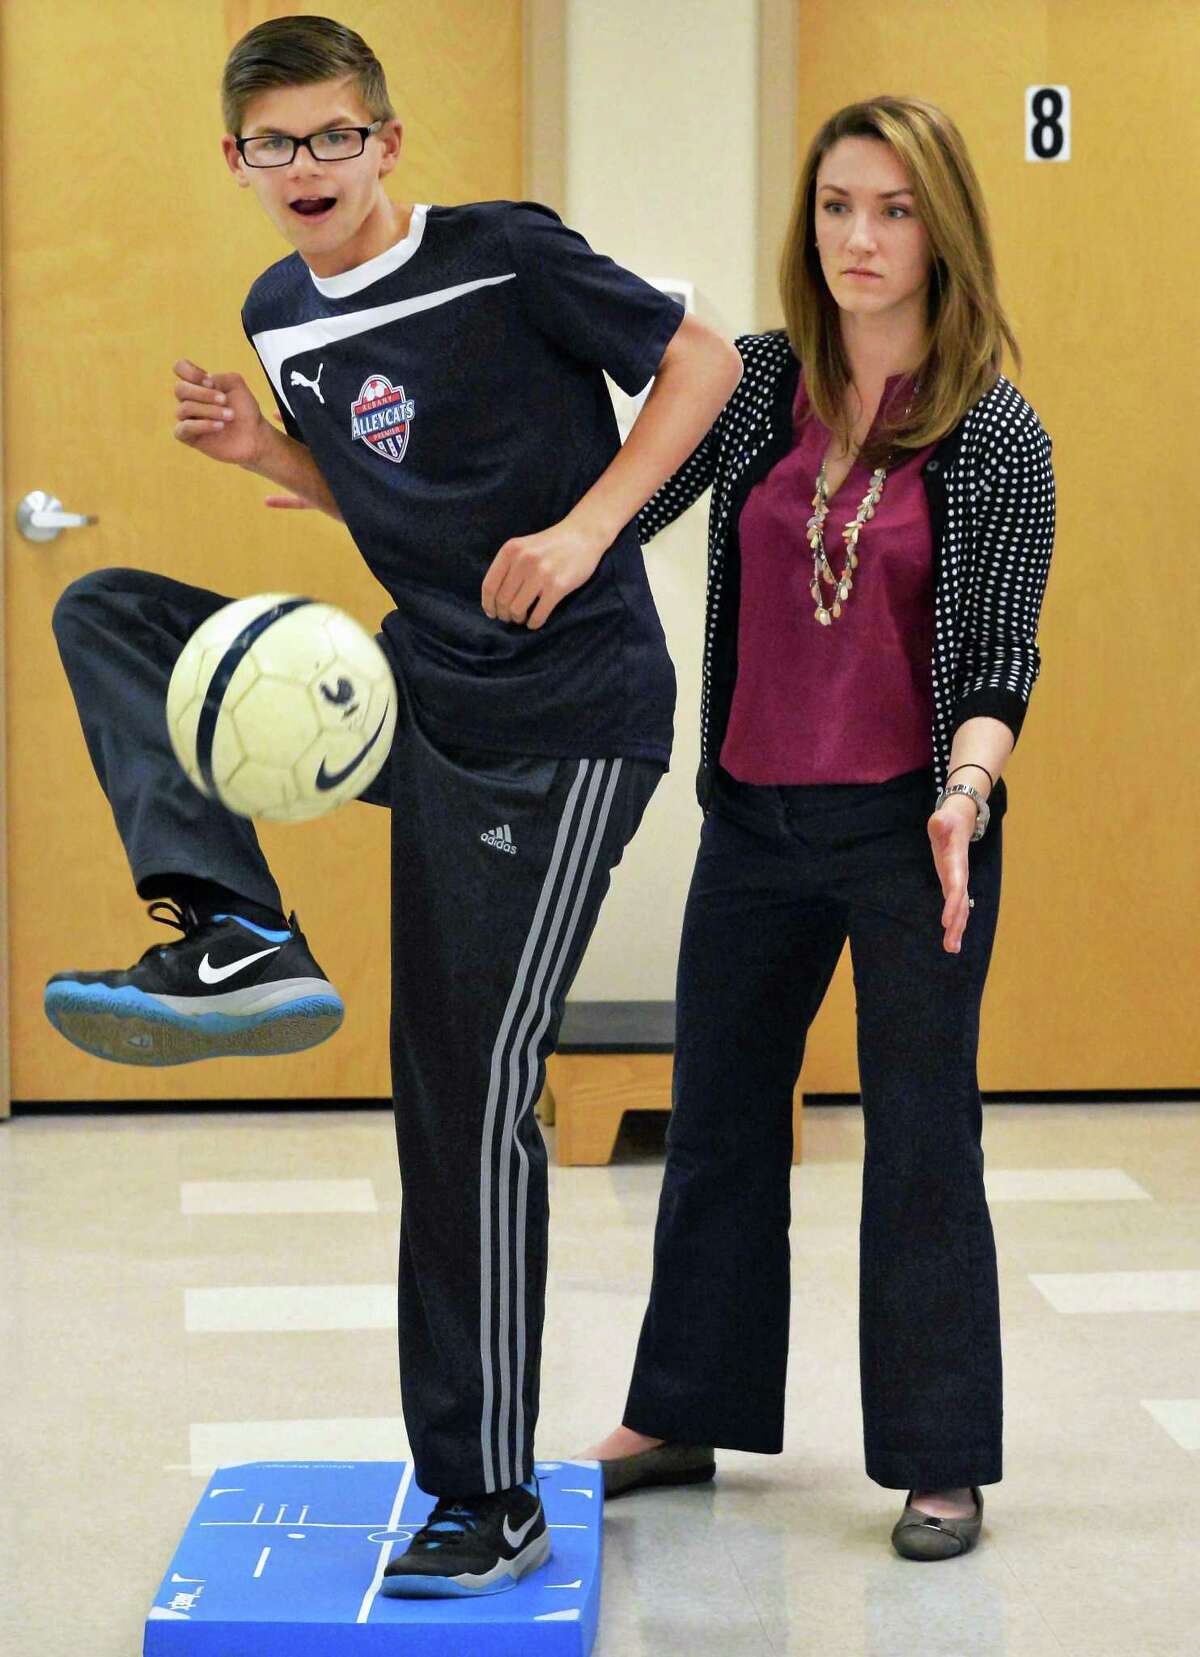 Physical therapist Audrey Paslow, right, conducts a sports readiness exercise with Conor Van Sise, 14, of the Albany Alleycats soccer club, at Ellis Medicine Friday Nov.20, 2015 in Clifton Park, NY. (John Carl D'Annibale / Times Union)